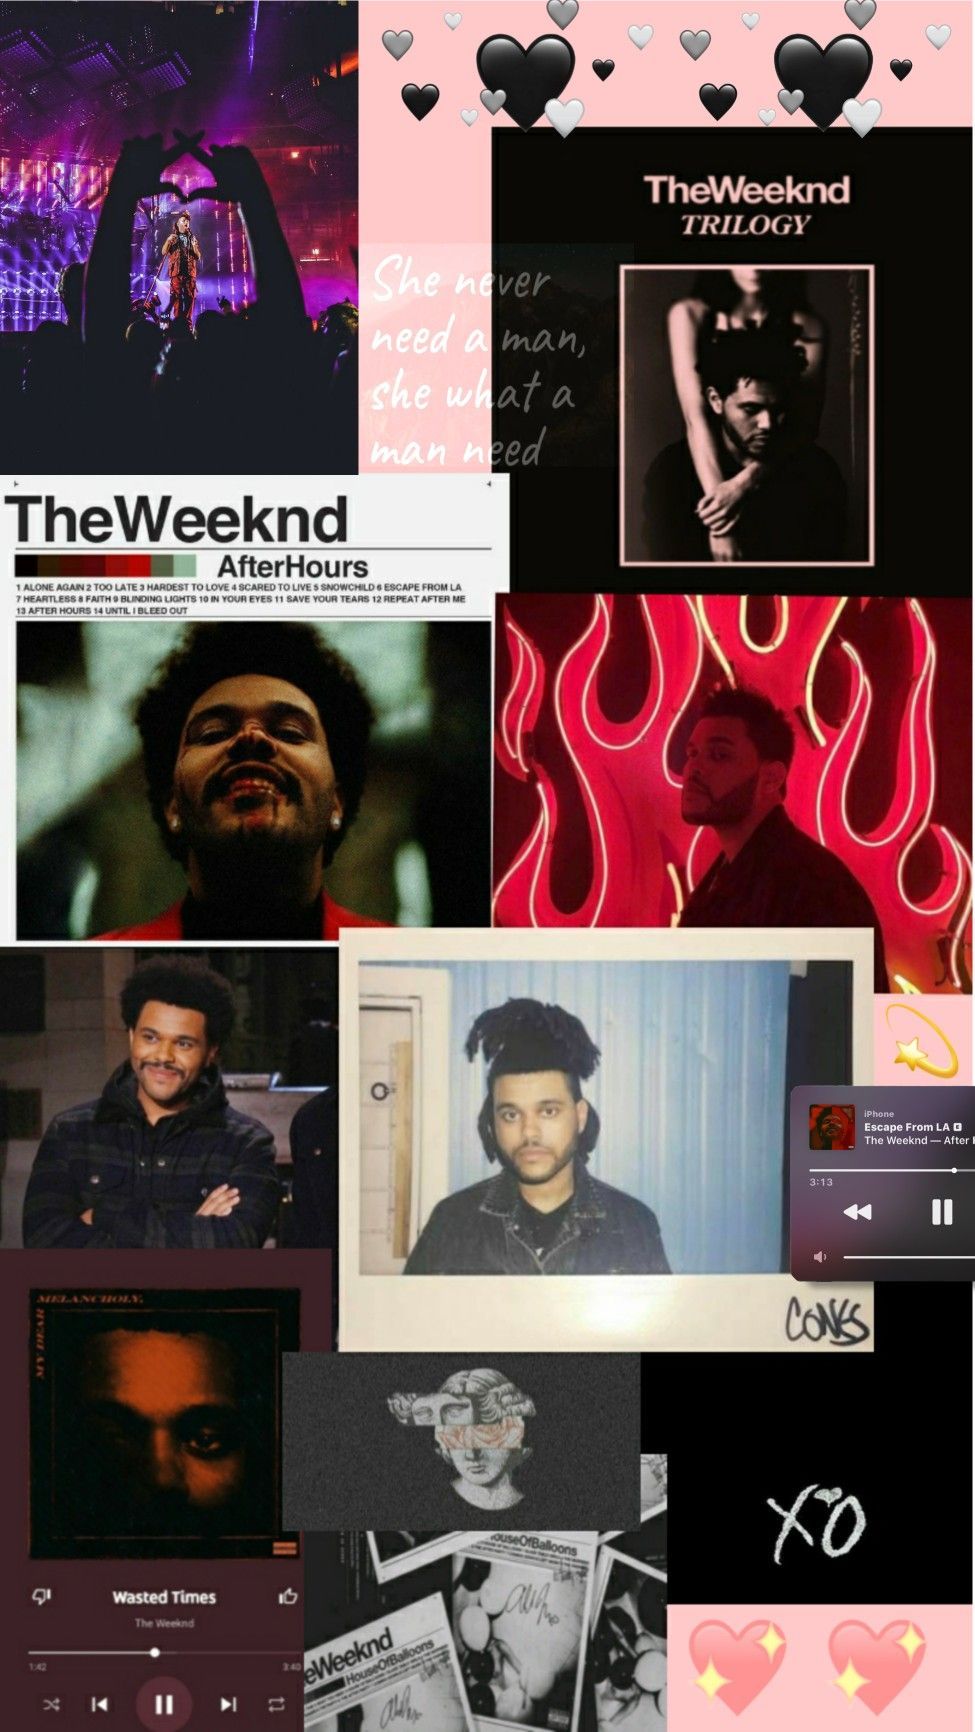 A collage of pictures with music and hearts - The Weeknd